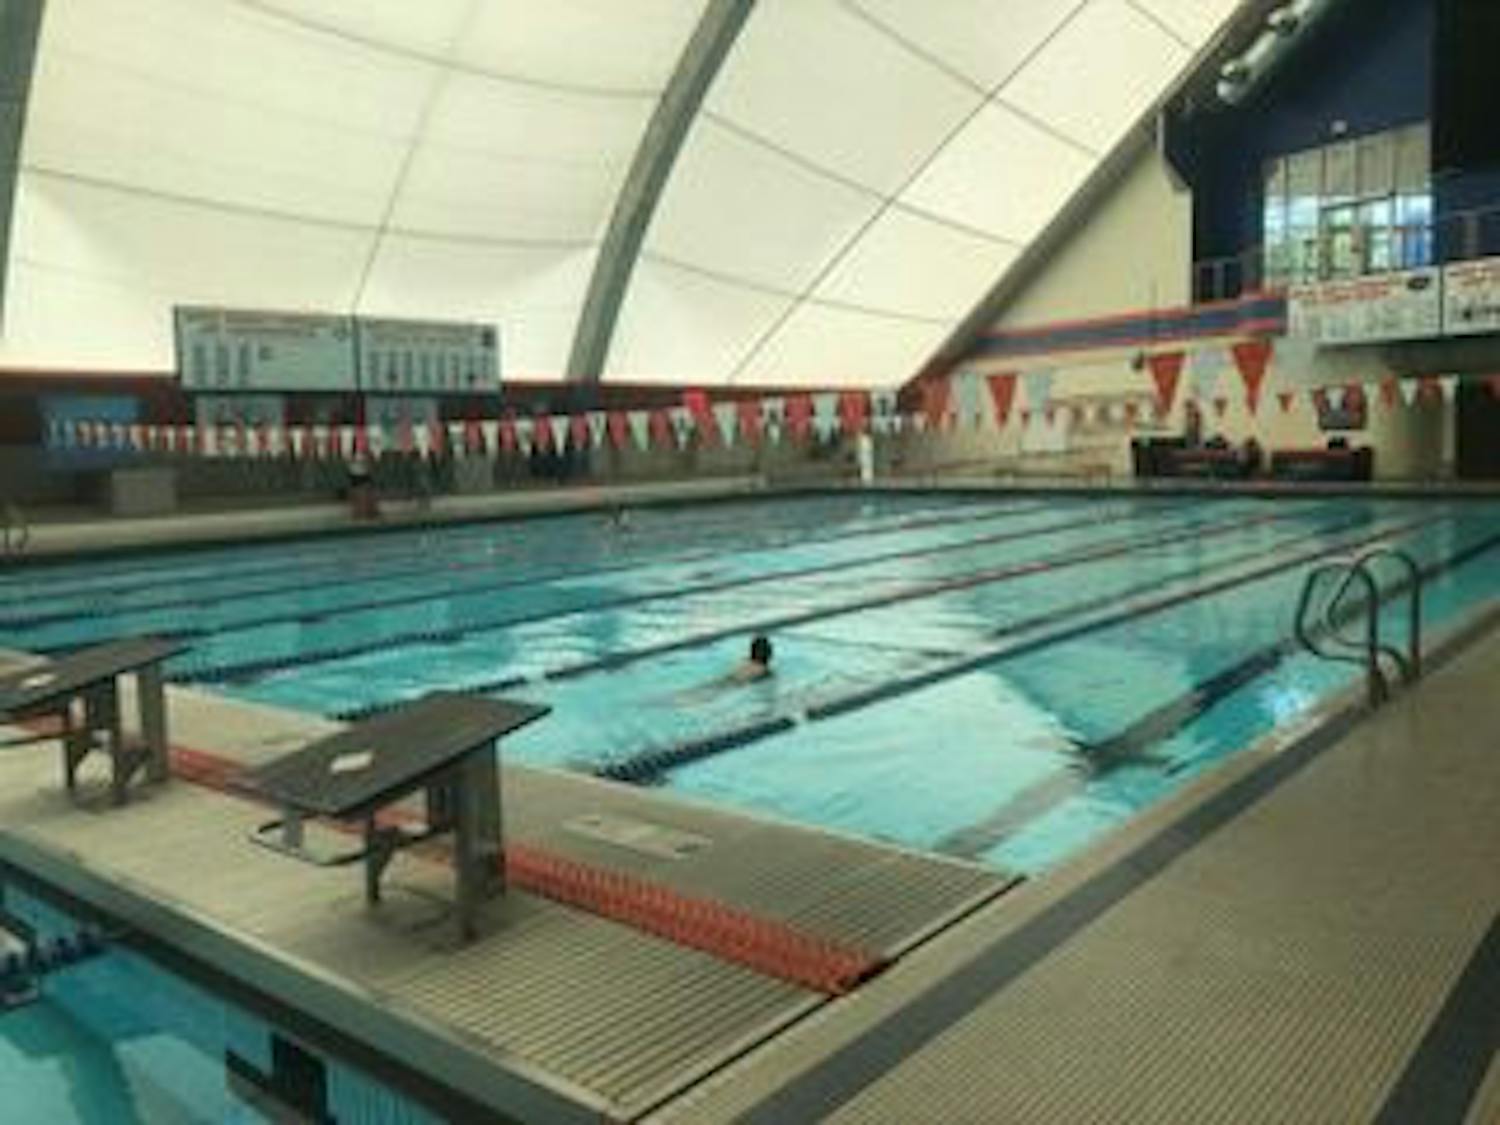 


View of the Florida Pool, located under the O’Connell Center. Up to 30 patrons visit the pool at night during the spring and fall semesters, according to UF lifeguard Patrick Costello.&nbsp;
&nbsp;
&nbsp;

&nbsp;

&nbsp;
